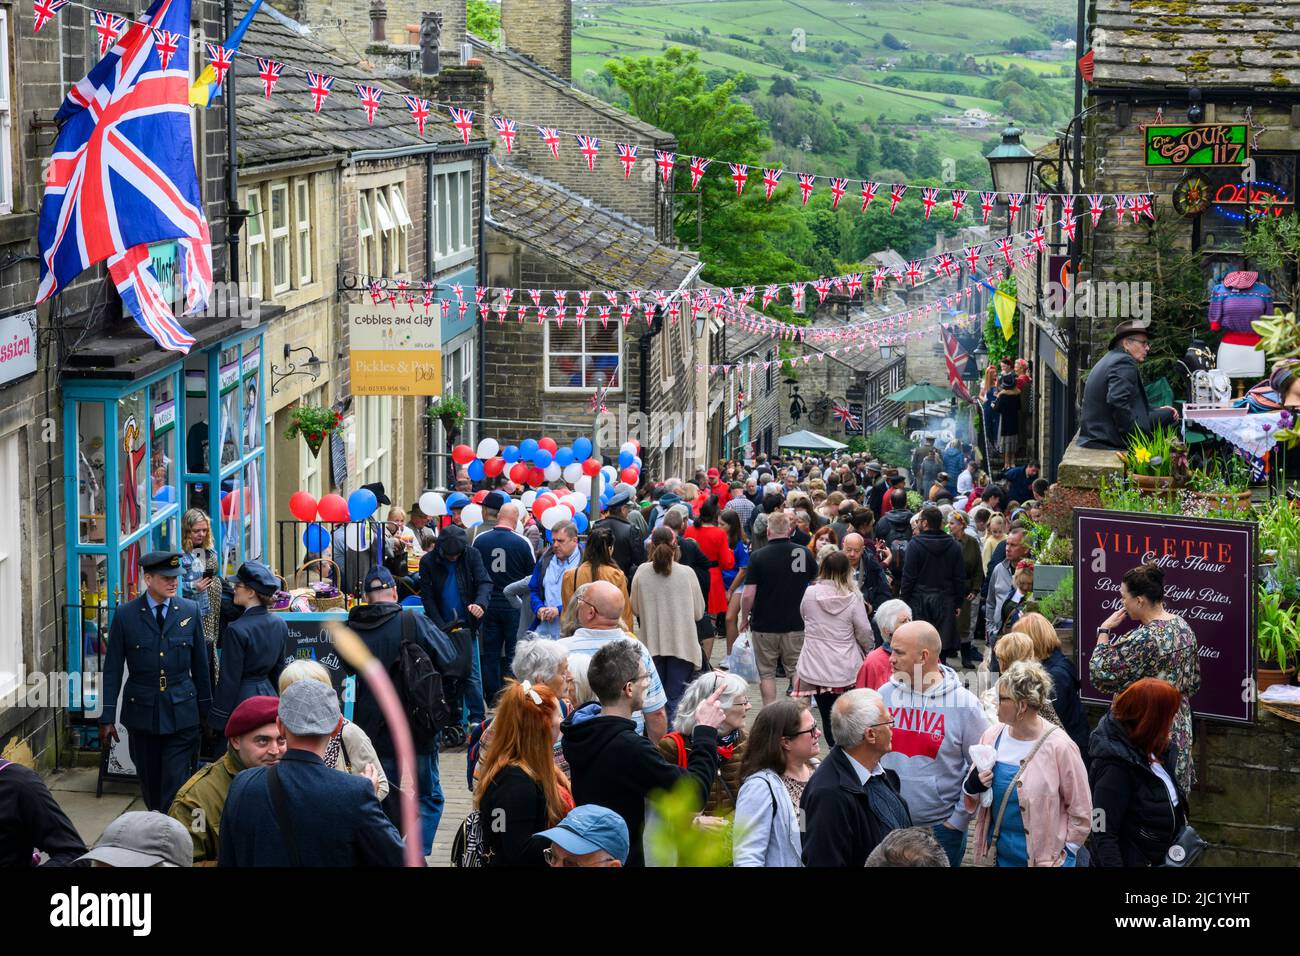 Haworth 1940's weekend (busy crowded scenic Main Street decorated in red white blue Union Jacks, popular family day-out) - West Yorkshire, England UK. Stock Photo